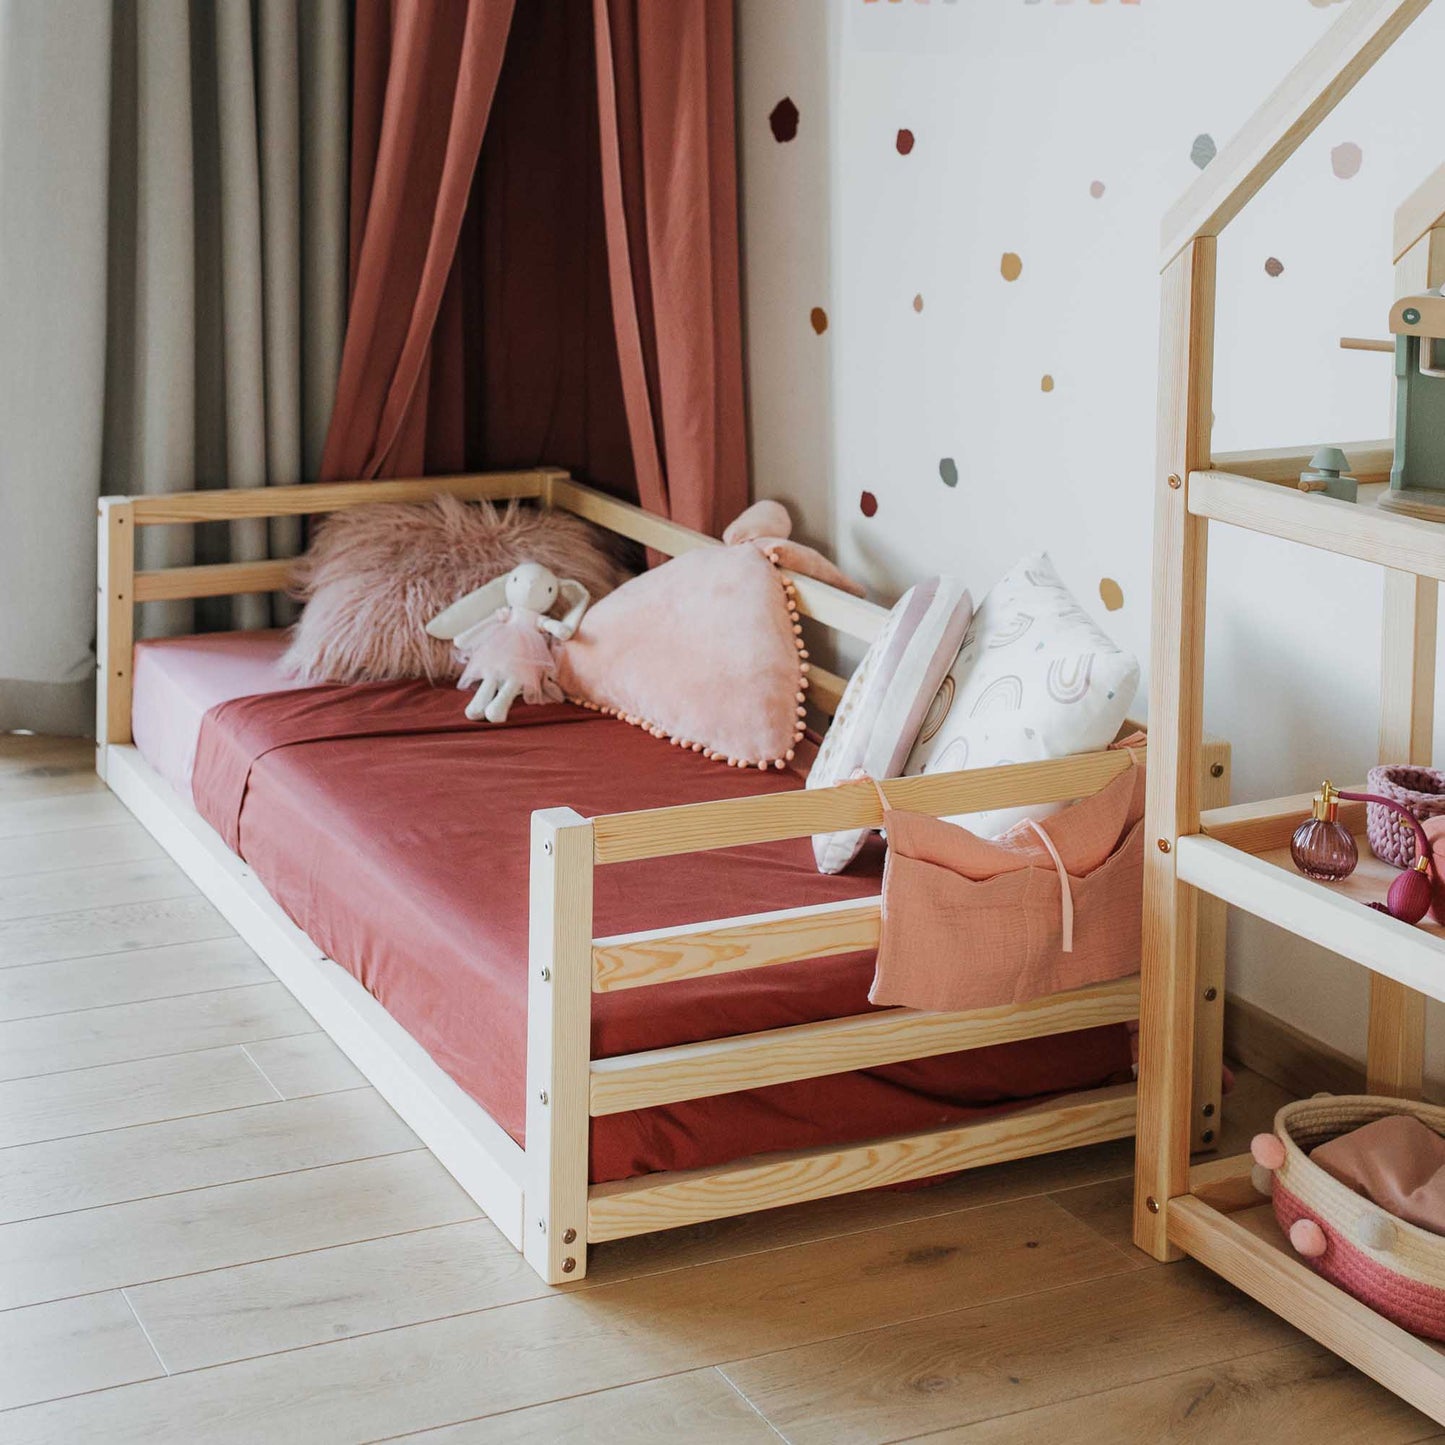 A Sweet Home From Wood 2-in-1 transformable kids' bed with a 3-sided horizontal rail.